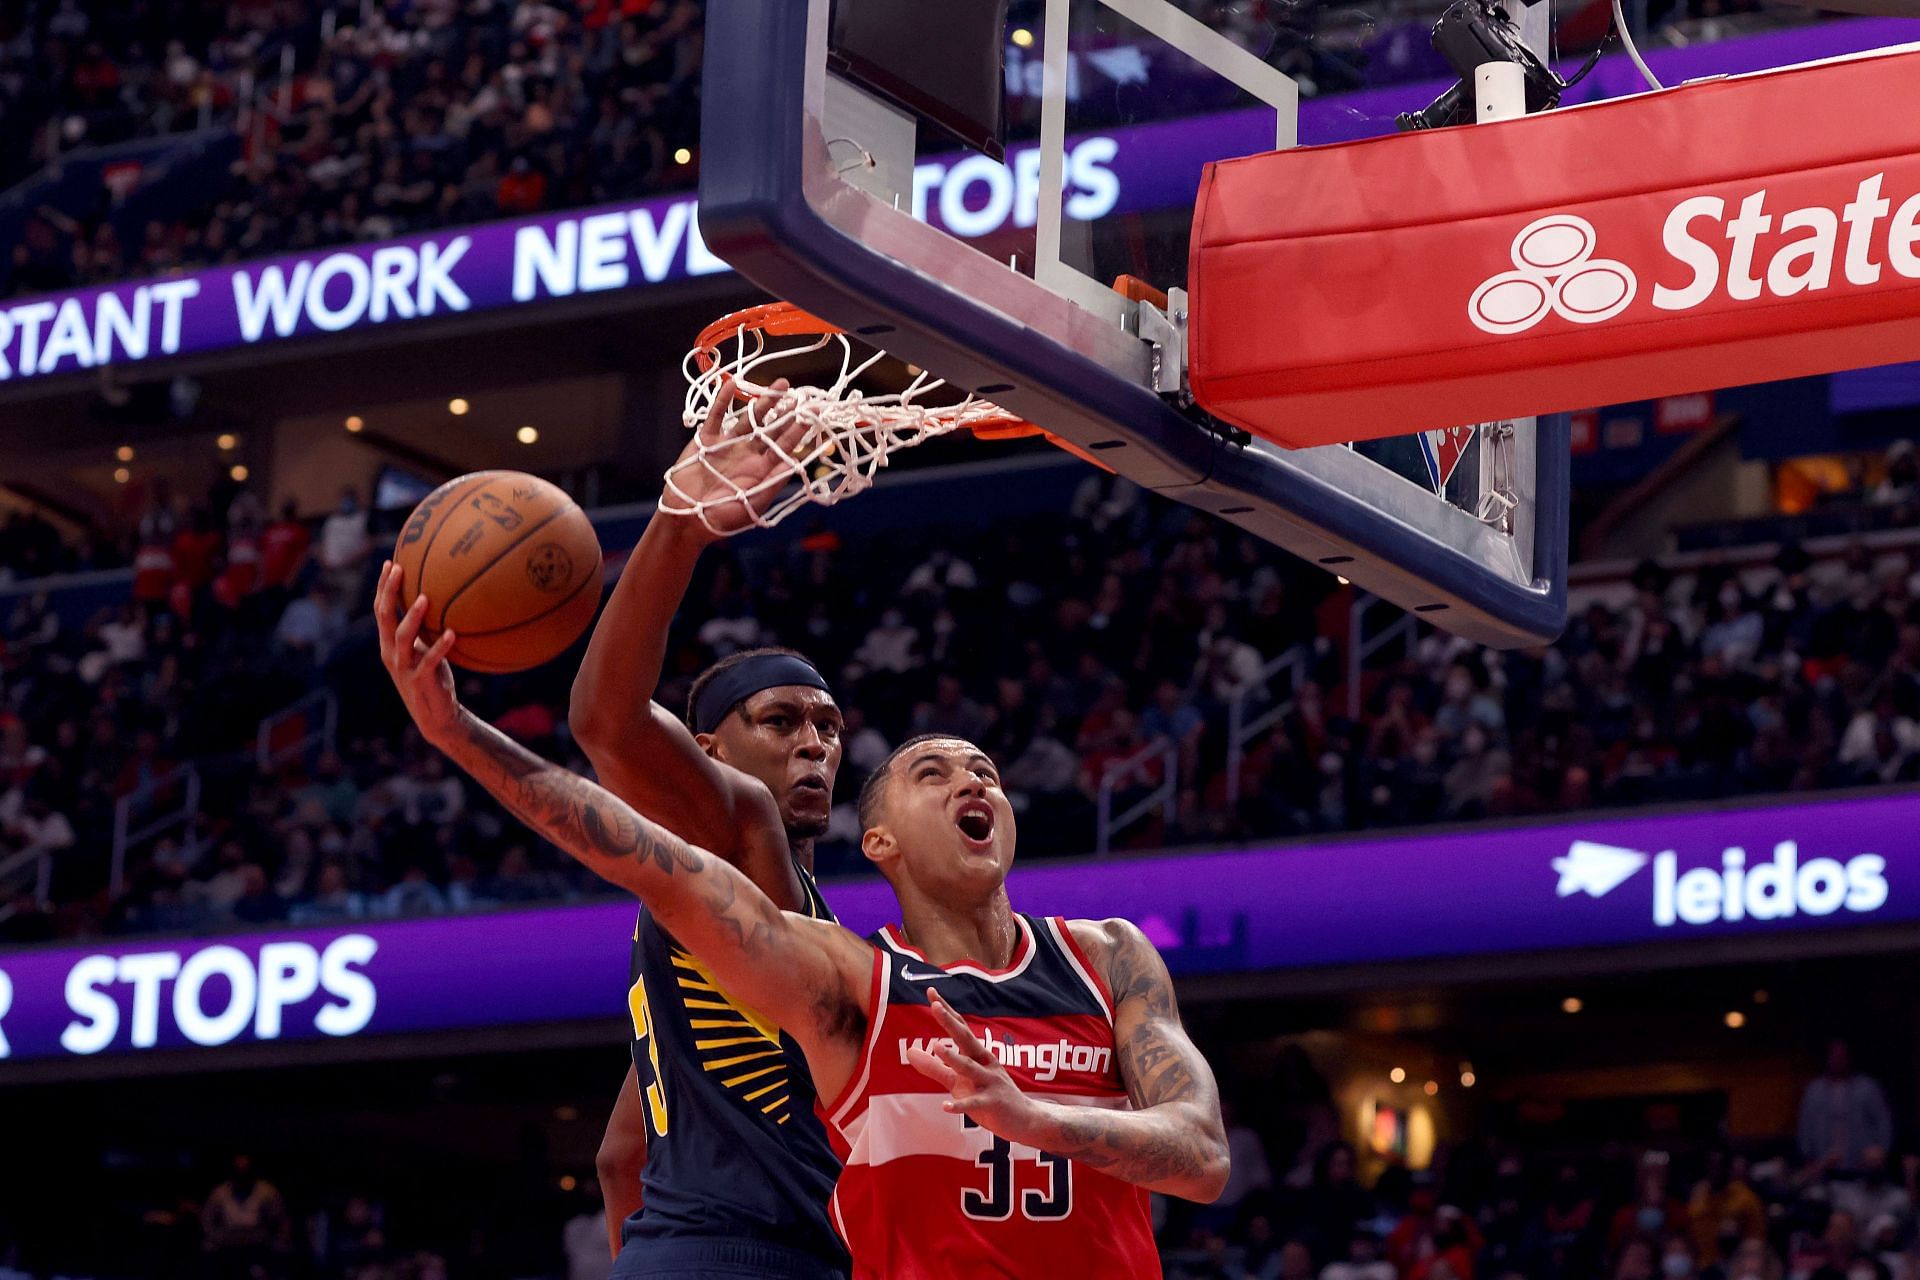 Kyle Kuzma is one of the players who appreciate the new rules implemented by the NBA regarding no-calls on non-basketball moves.